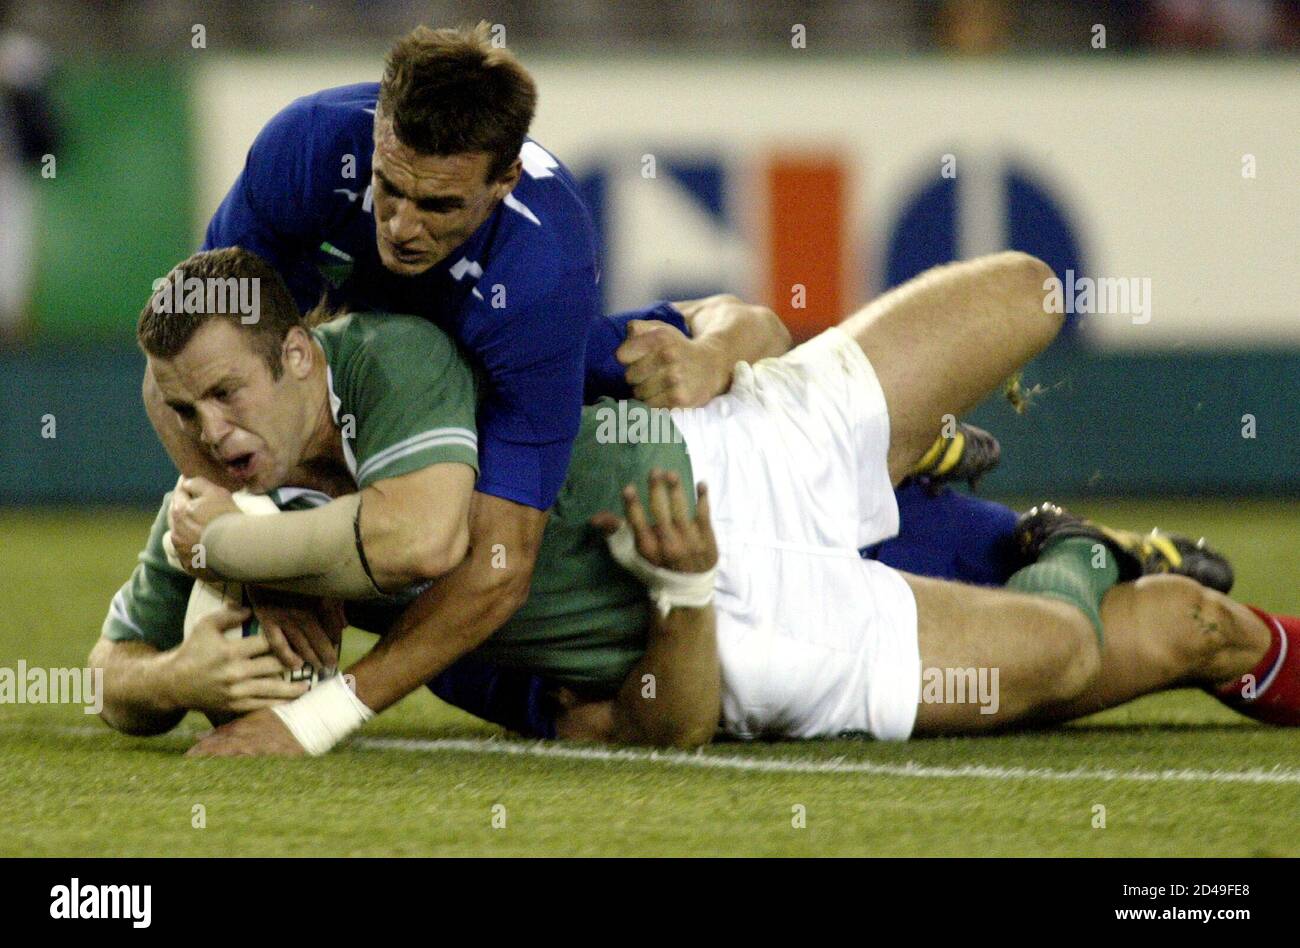 Ireland's Kevin Maggs breaks past the tackle of France's Nicolas Brusque to score during their 2003 Rugby World Cup Pool quarterfinal match at the Docklands Stadium in Melbourne, November 9, 2003. Stock Photo